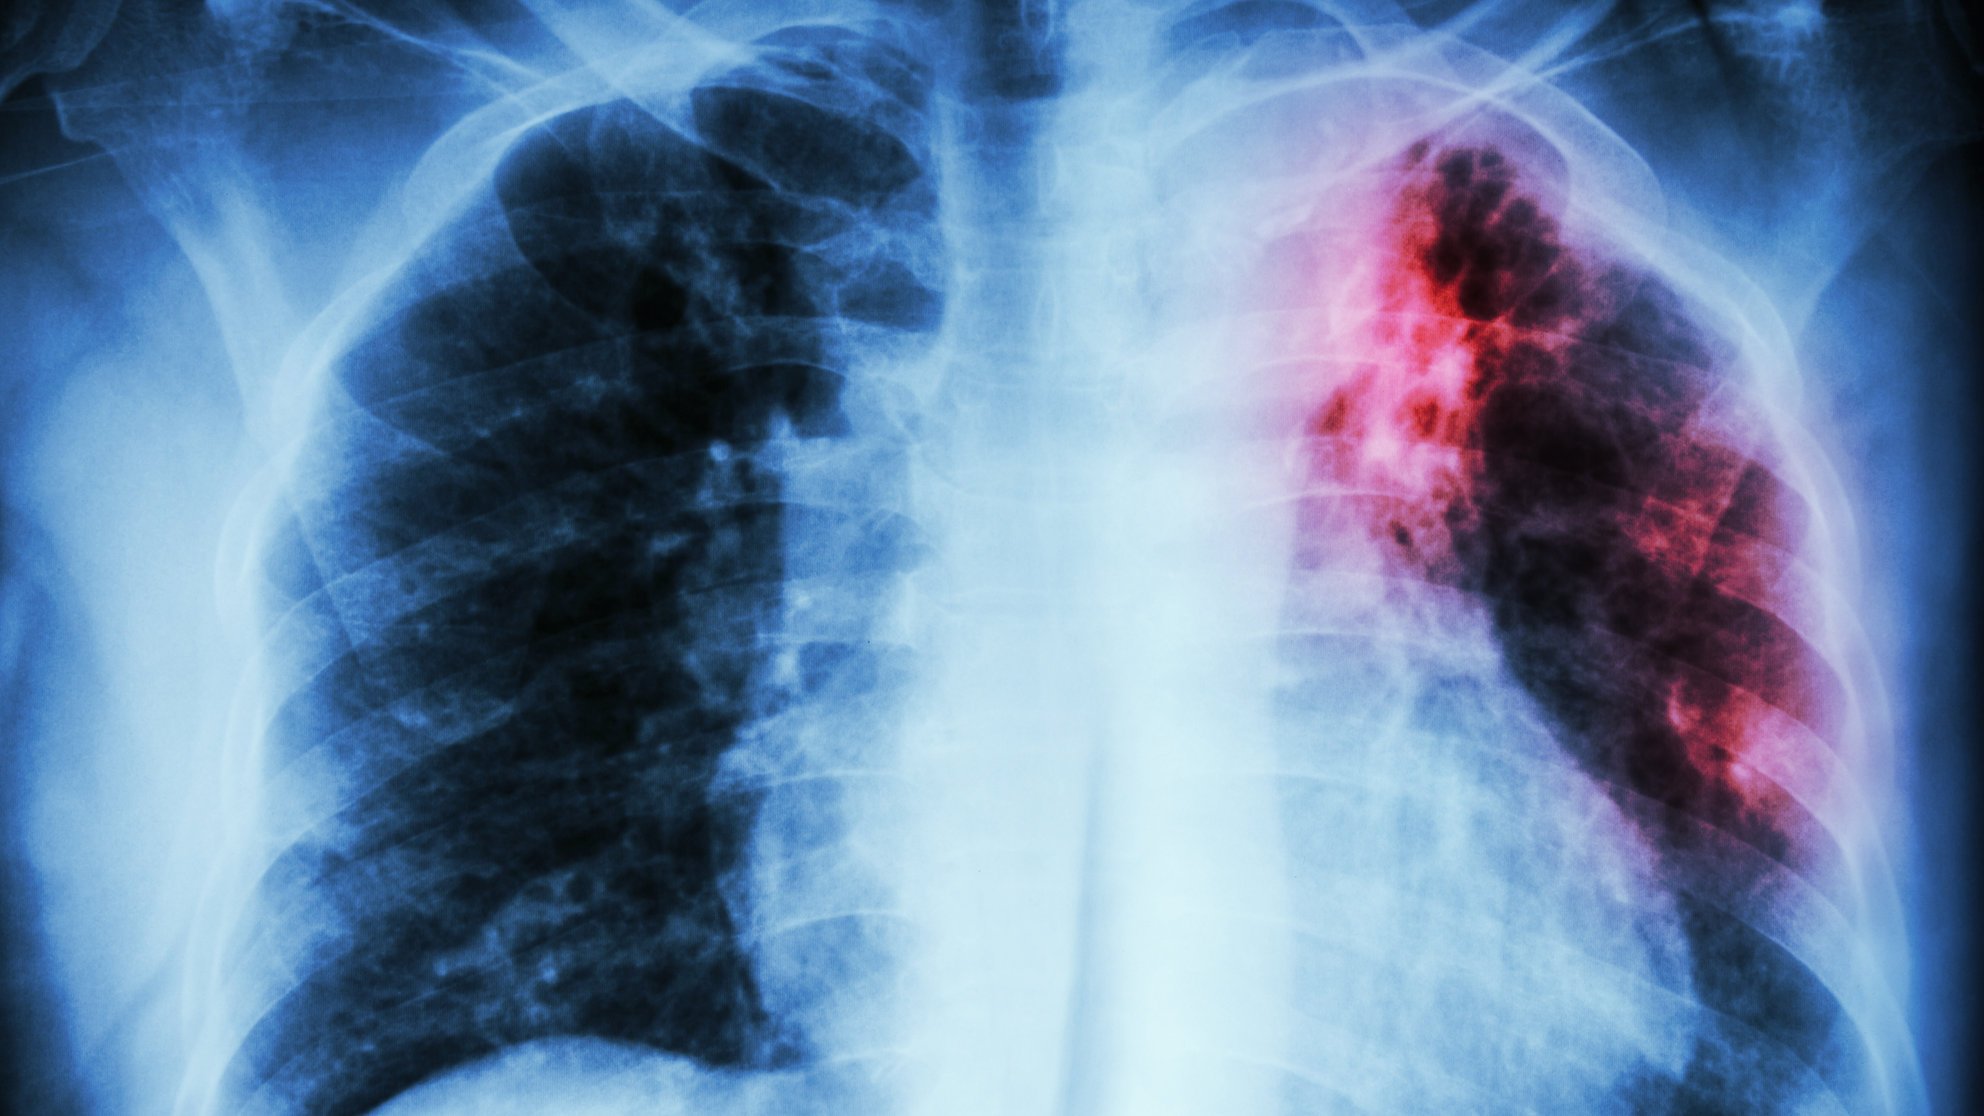 85 pct of Tuberculosis cases undetected in Ogun – Commissioner for Health